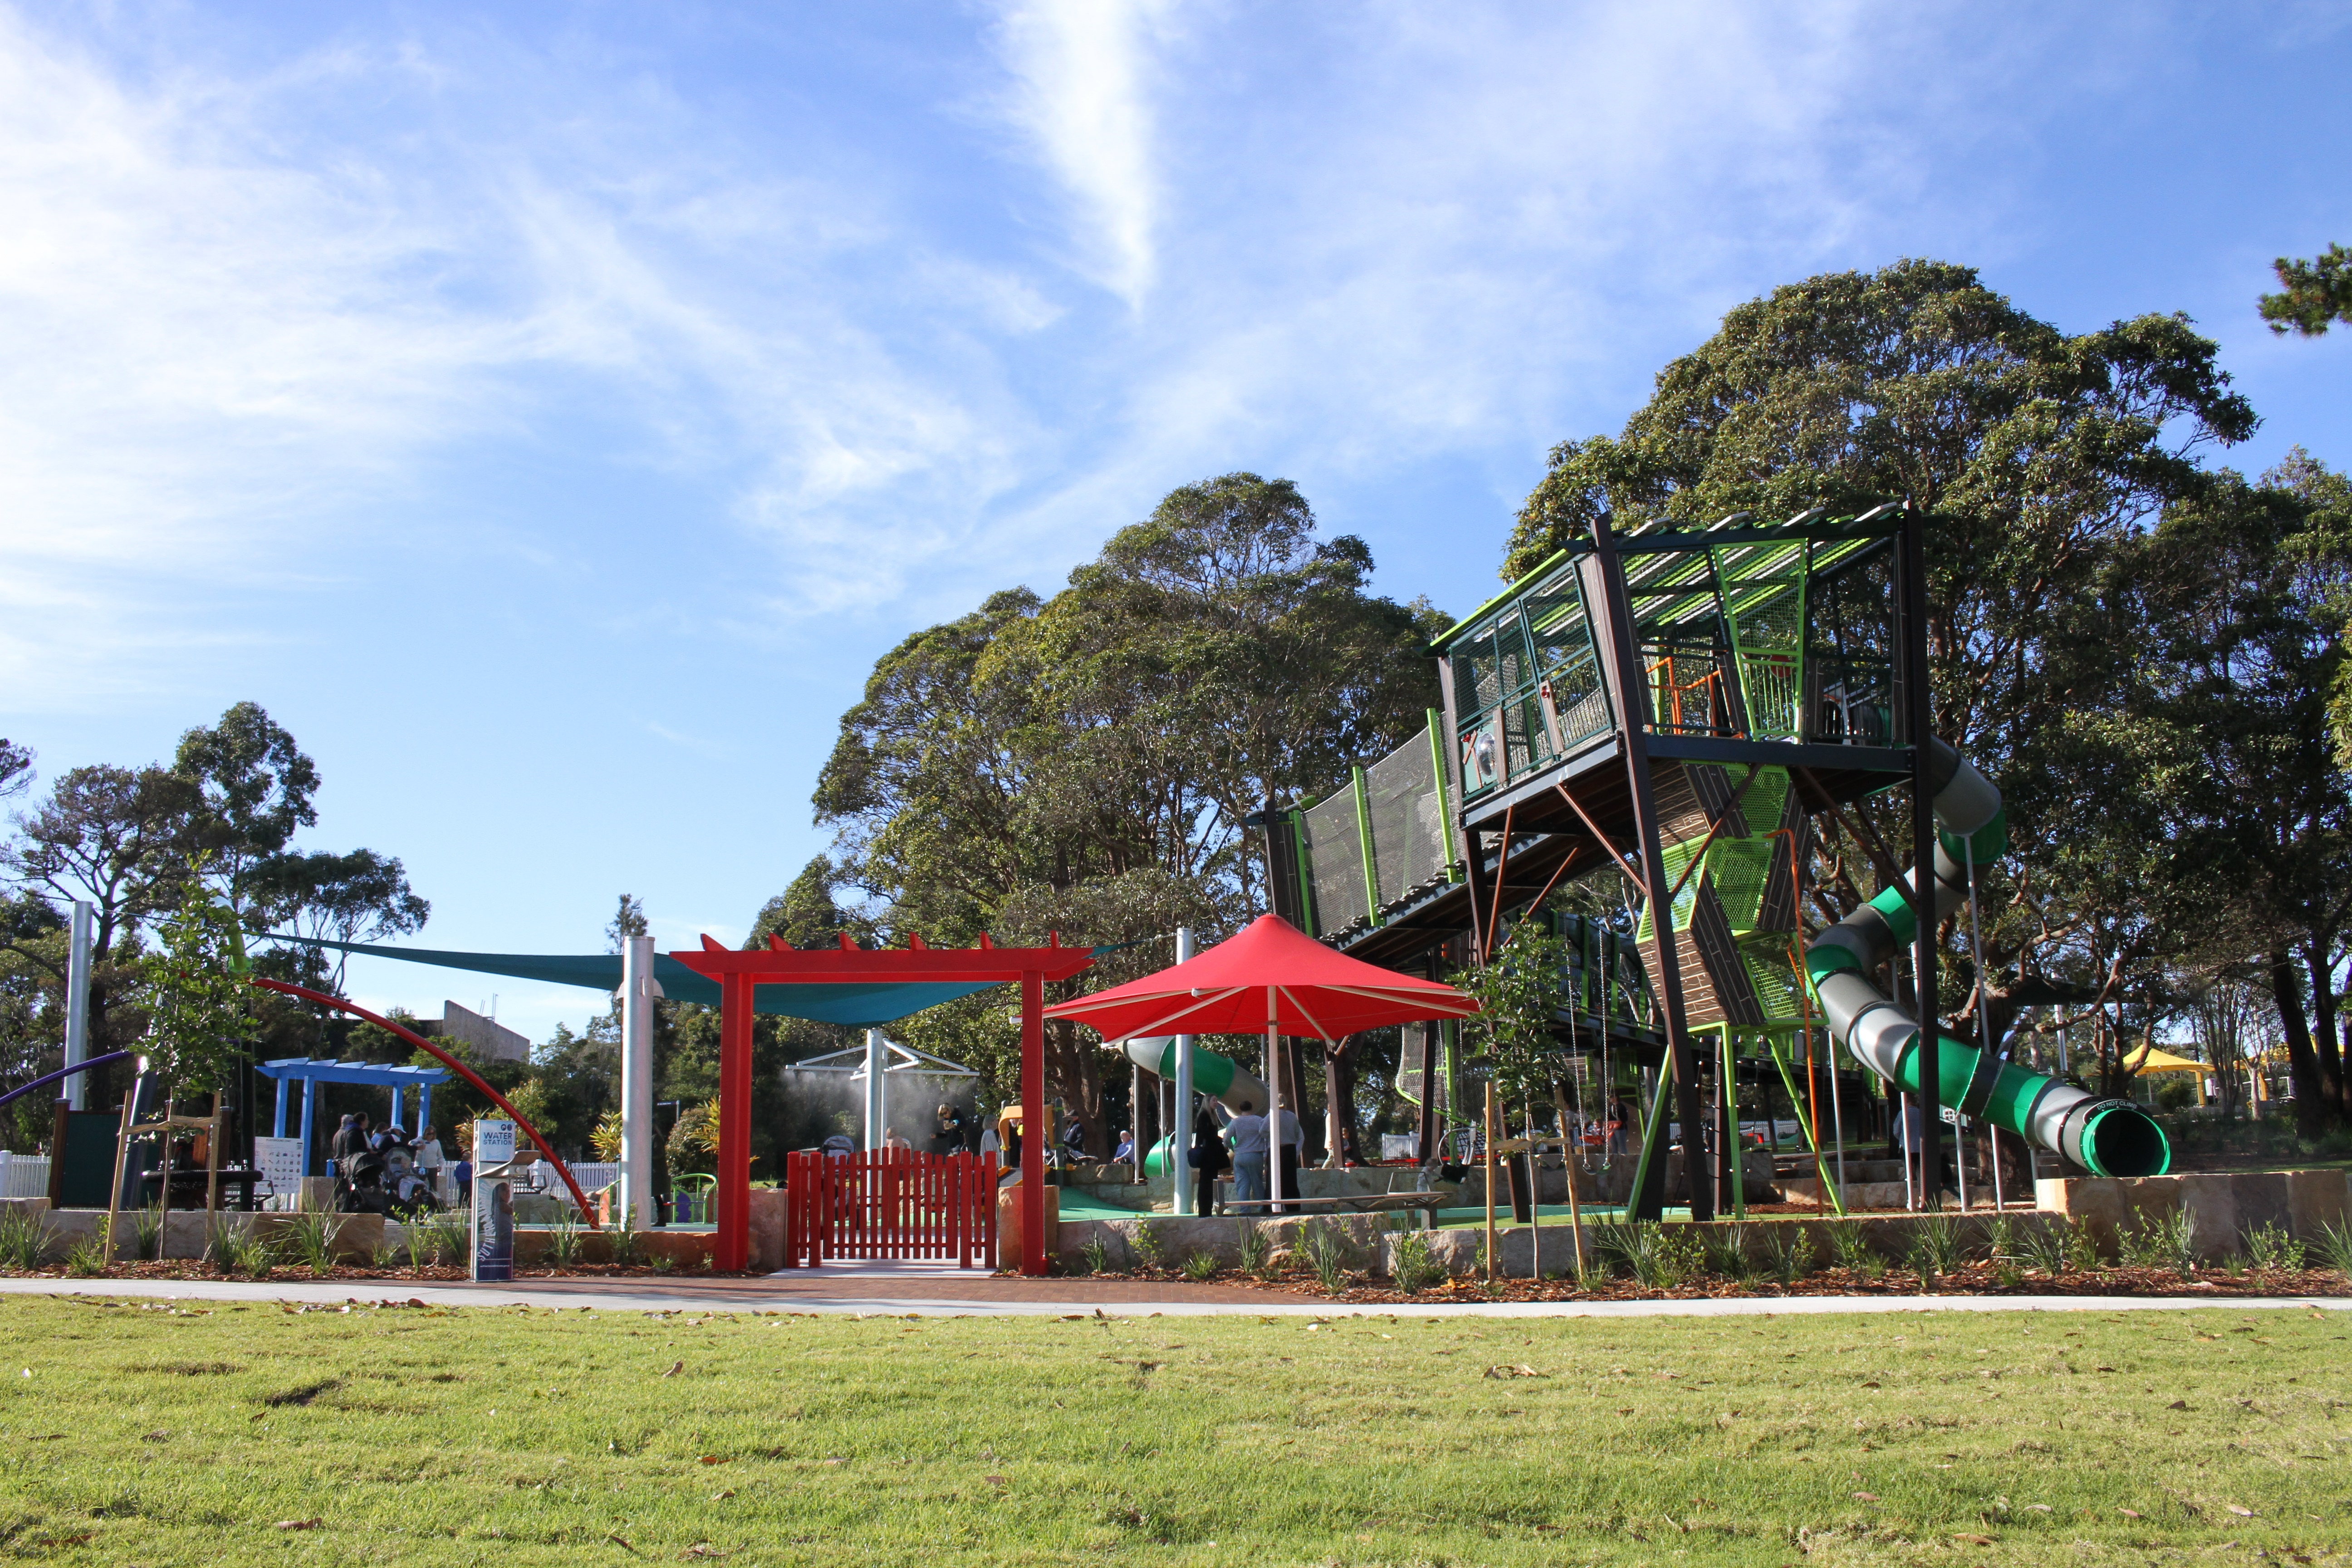 A playground with slide, shading and swings. Trees and blue sky in the background, green grass and footpath in the foreground